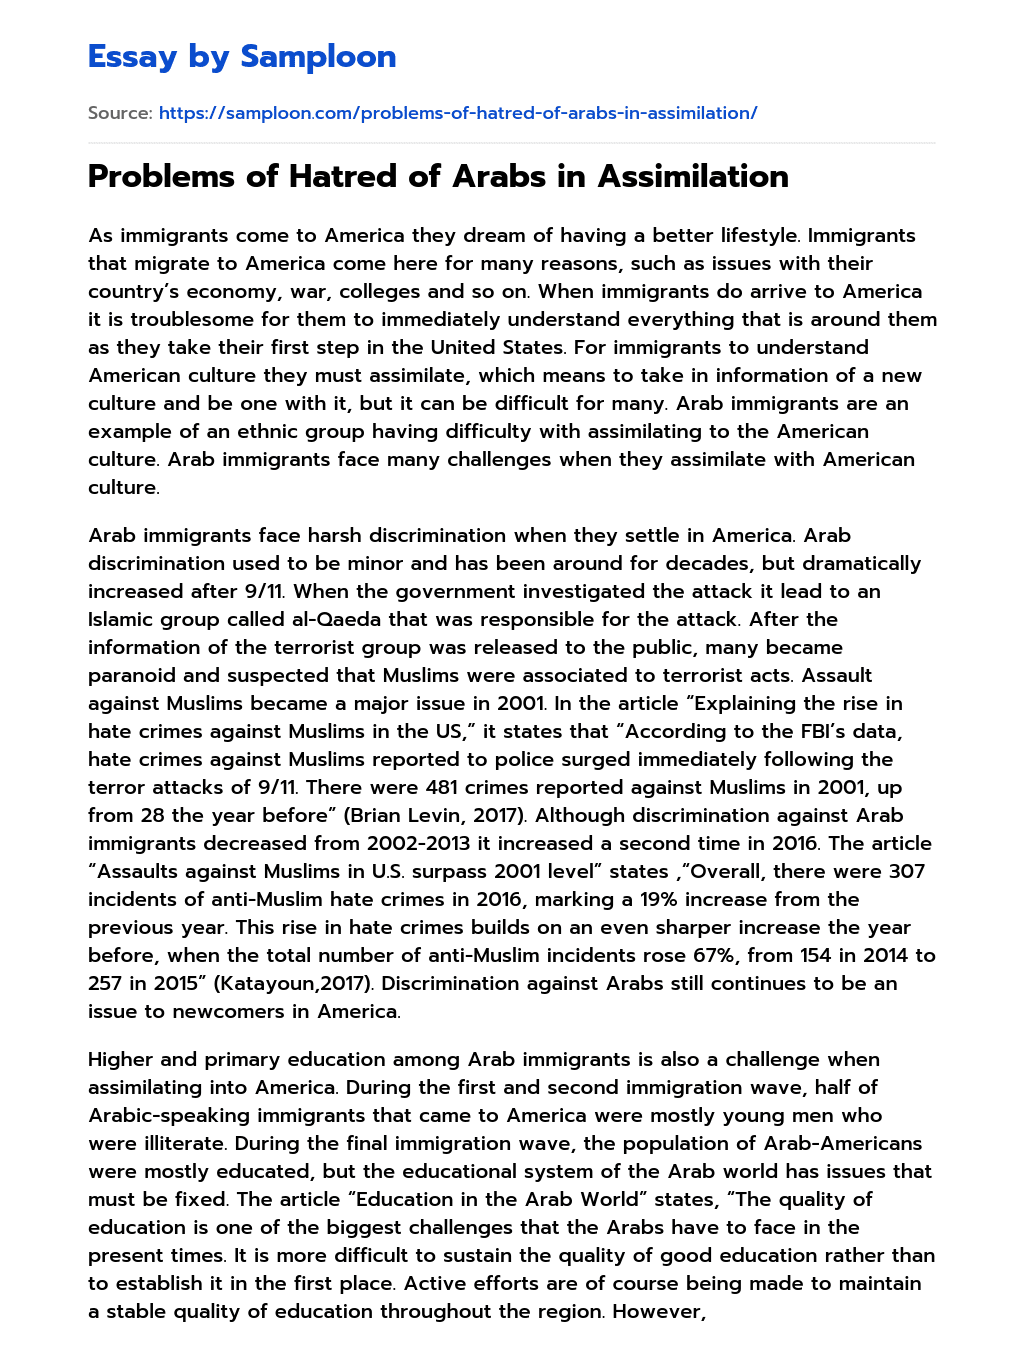 Problems of Hatred of Arabs in Assimilation essay